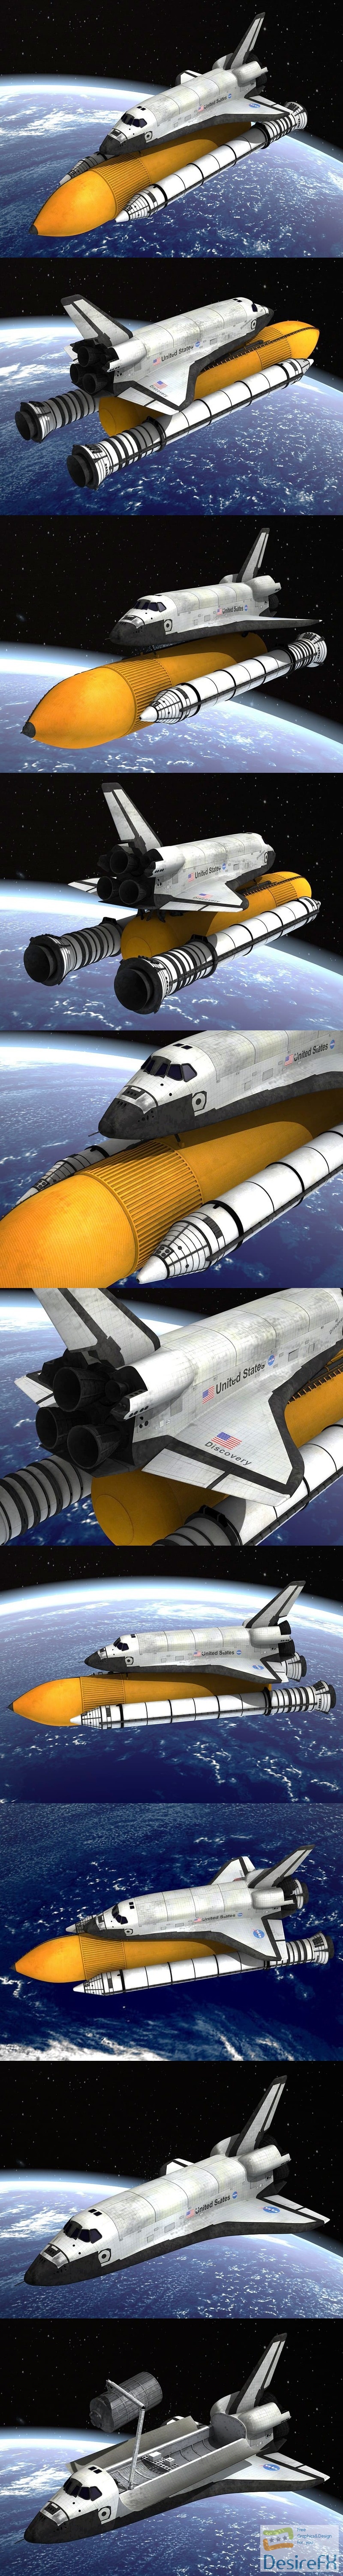 NASA Discovery Space Shuttle 3D Model